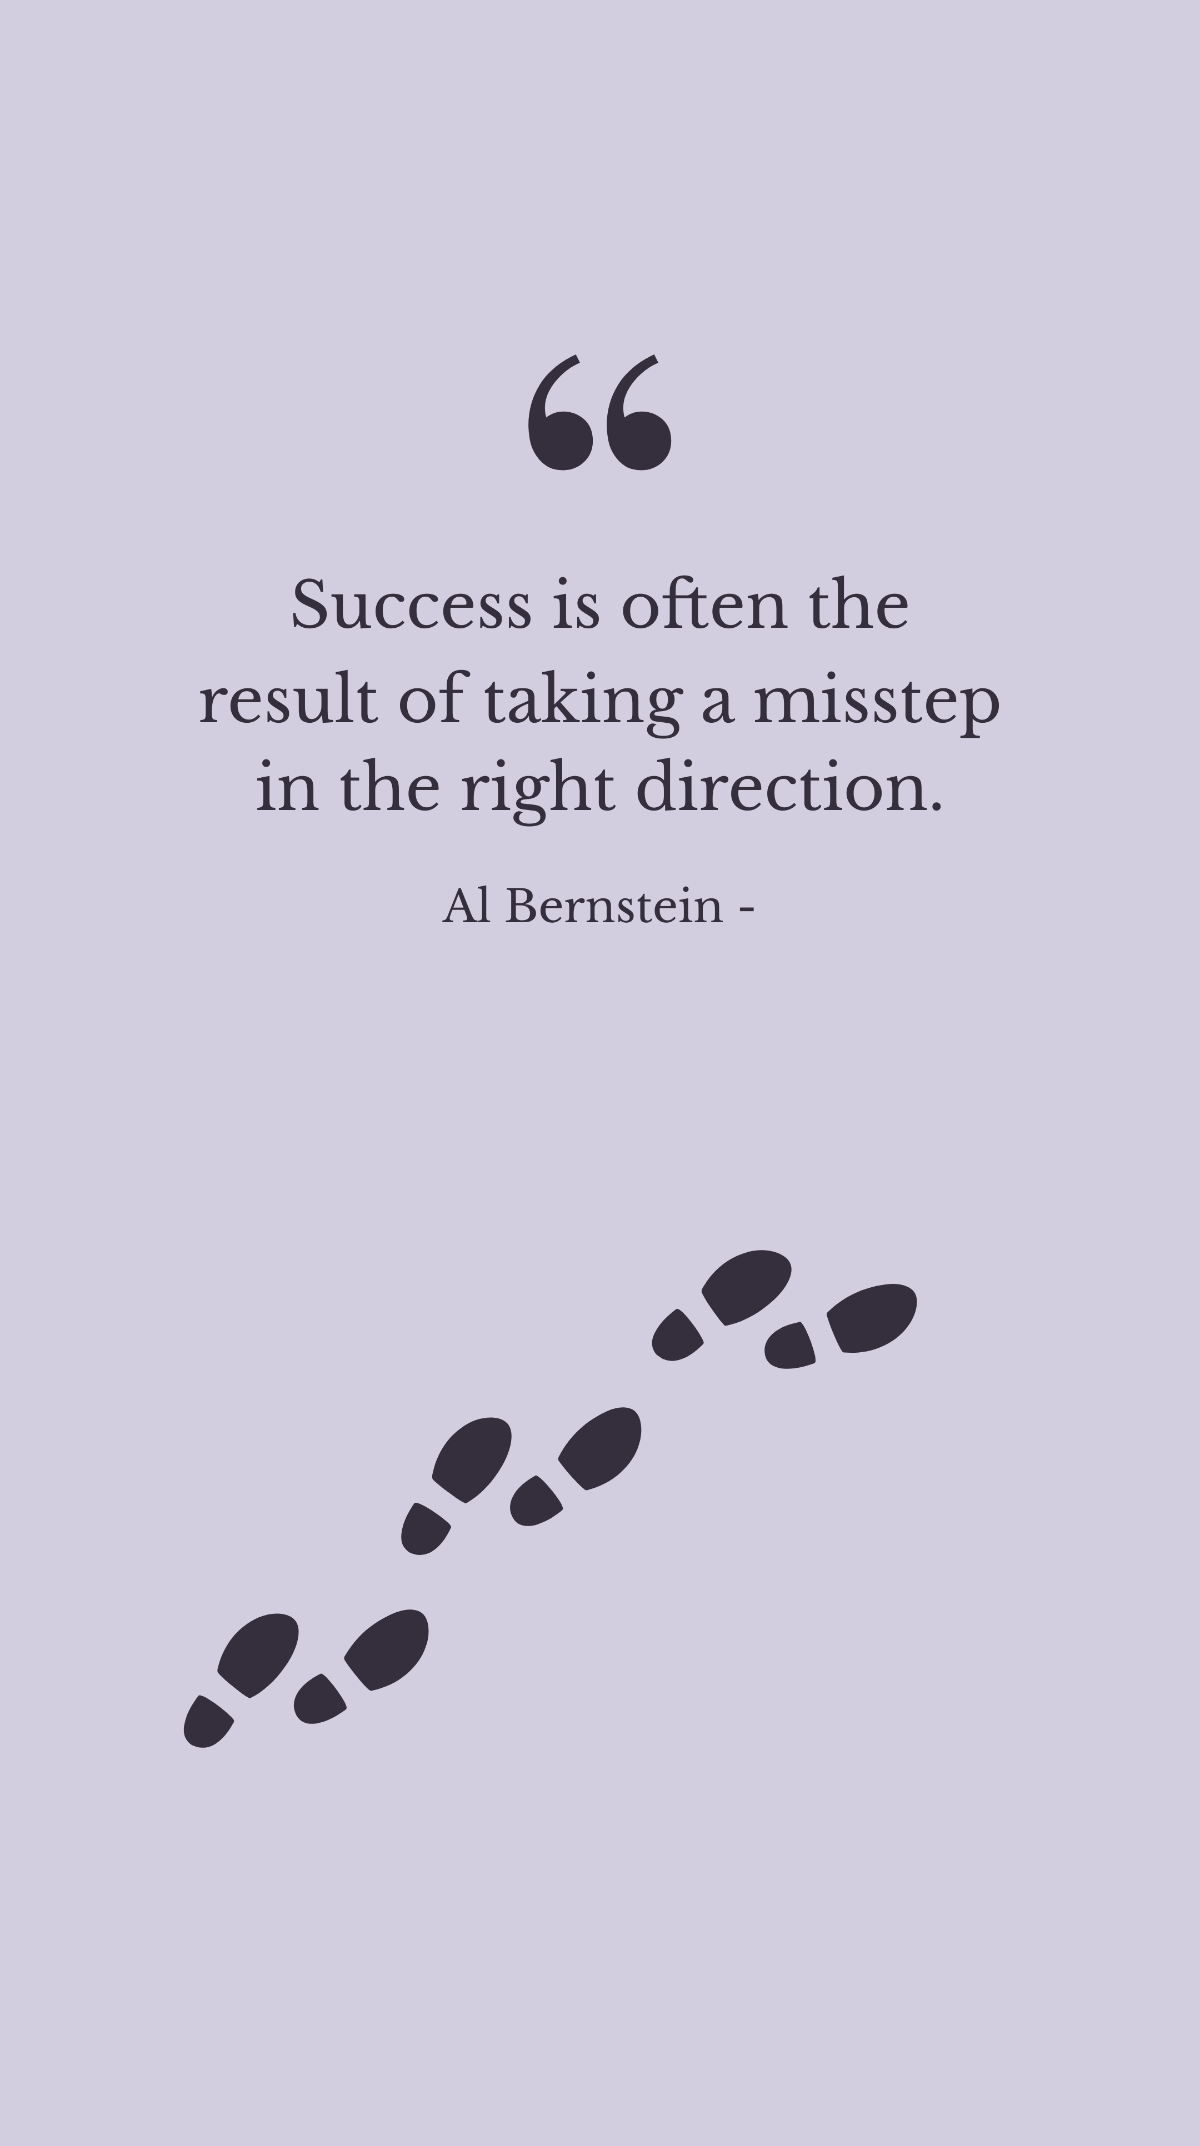 Al Bernstein - Success is often the result of taking a misstep in the right direction. Template